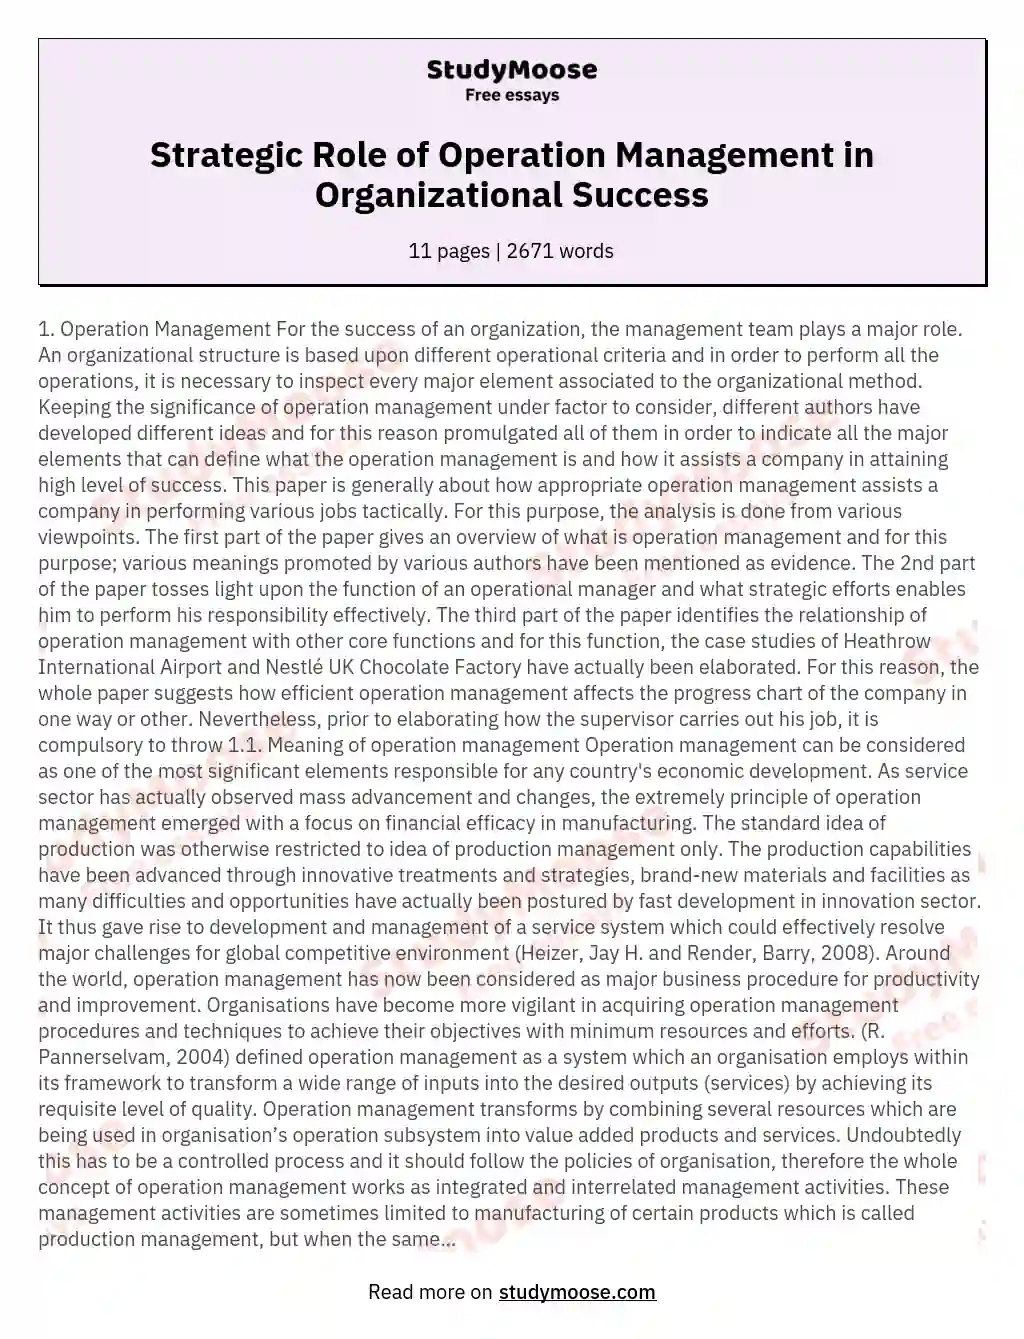 business operations essay